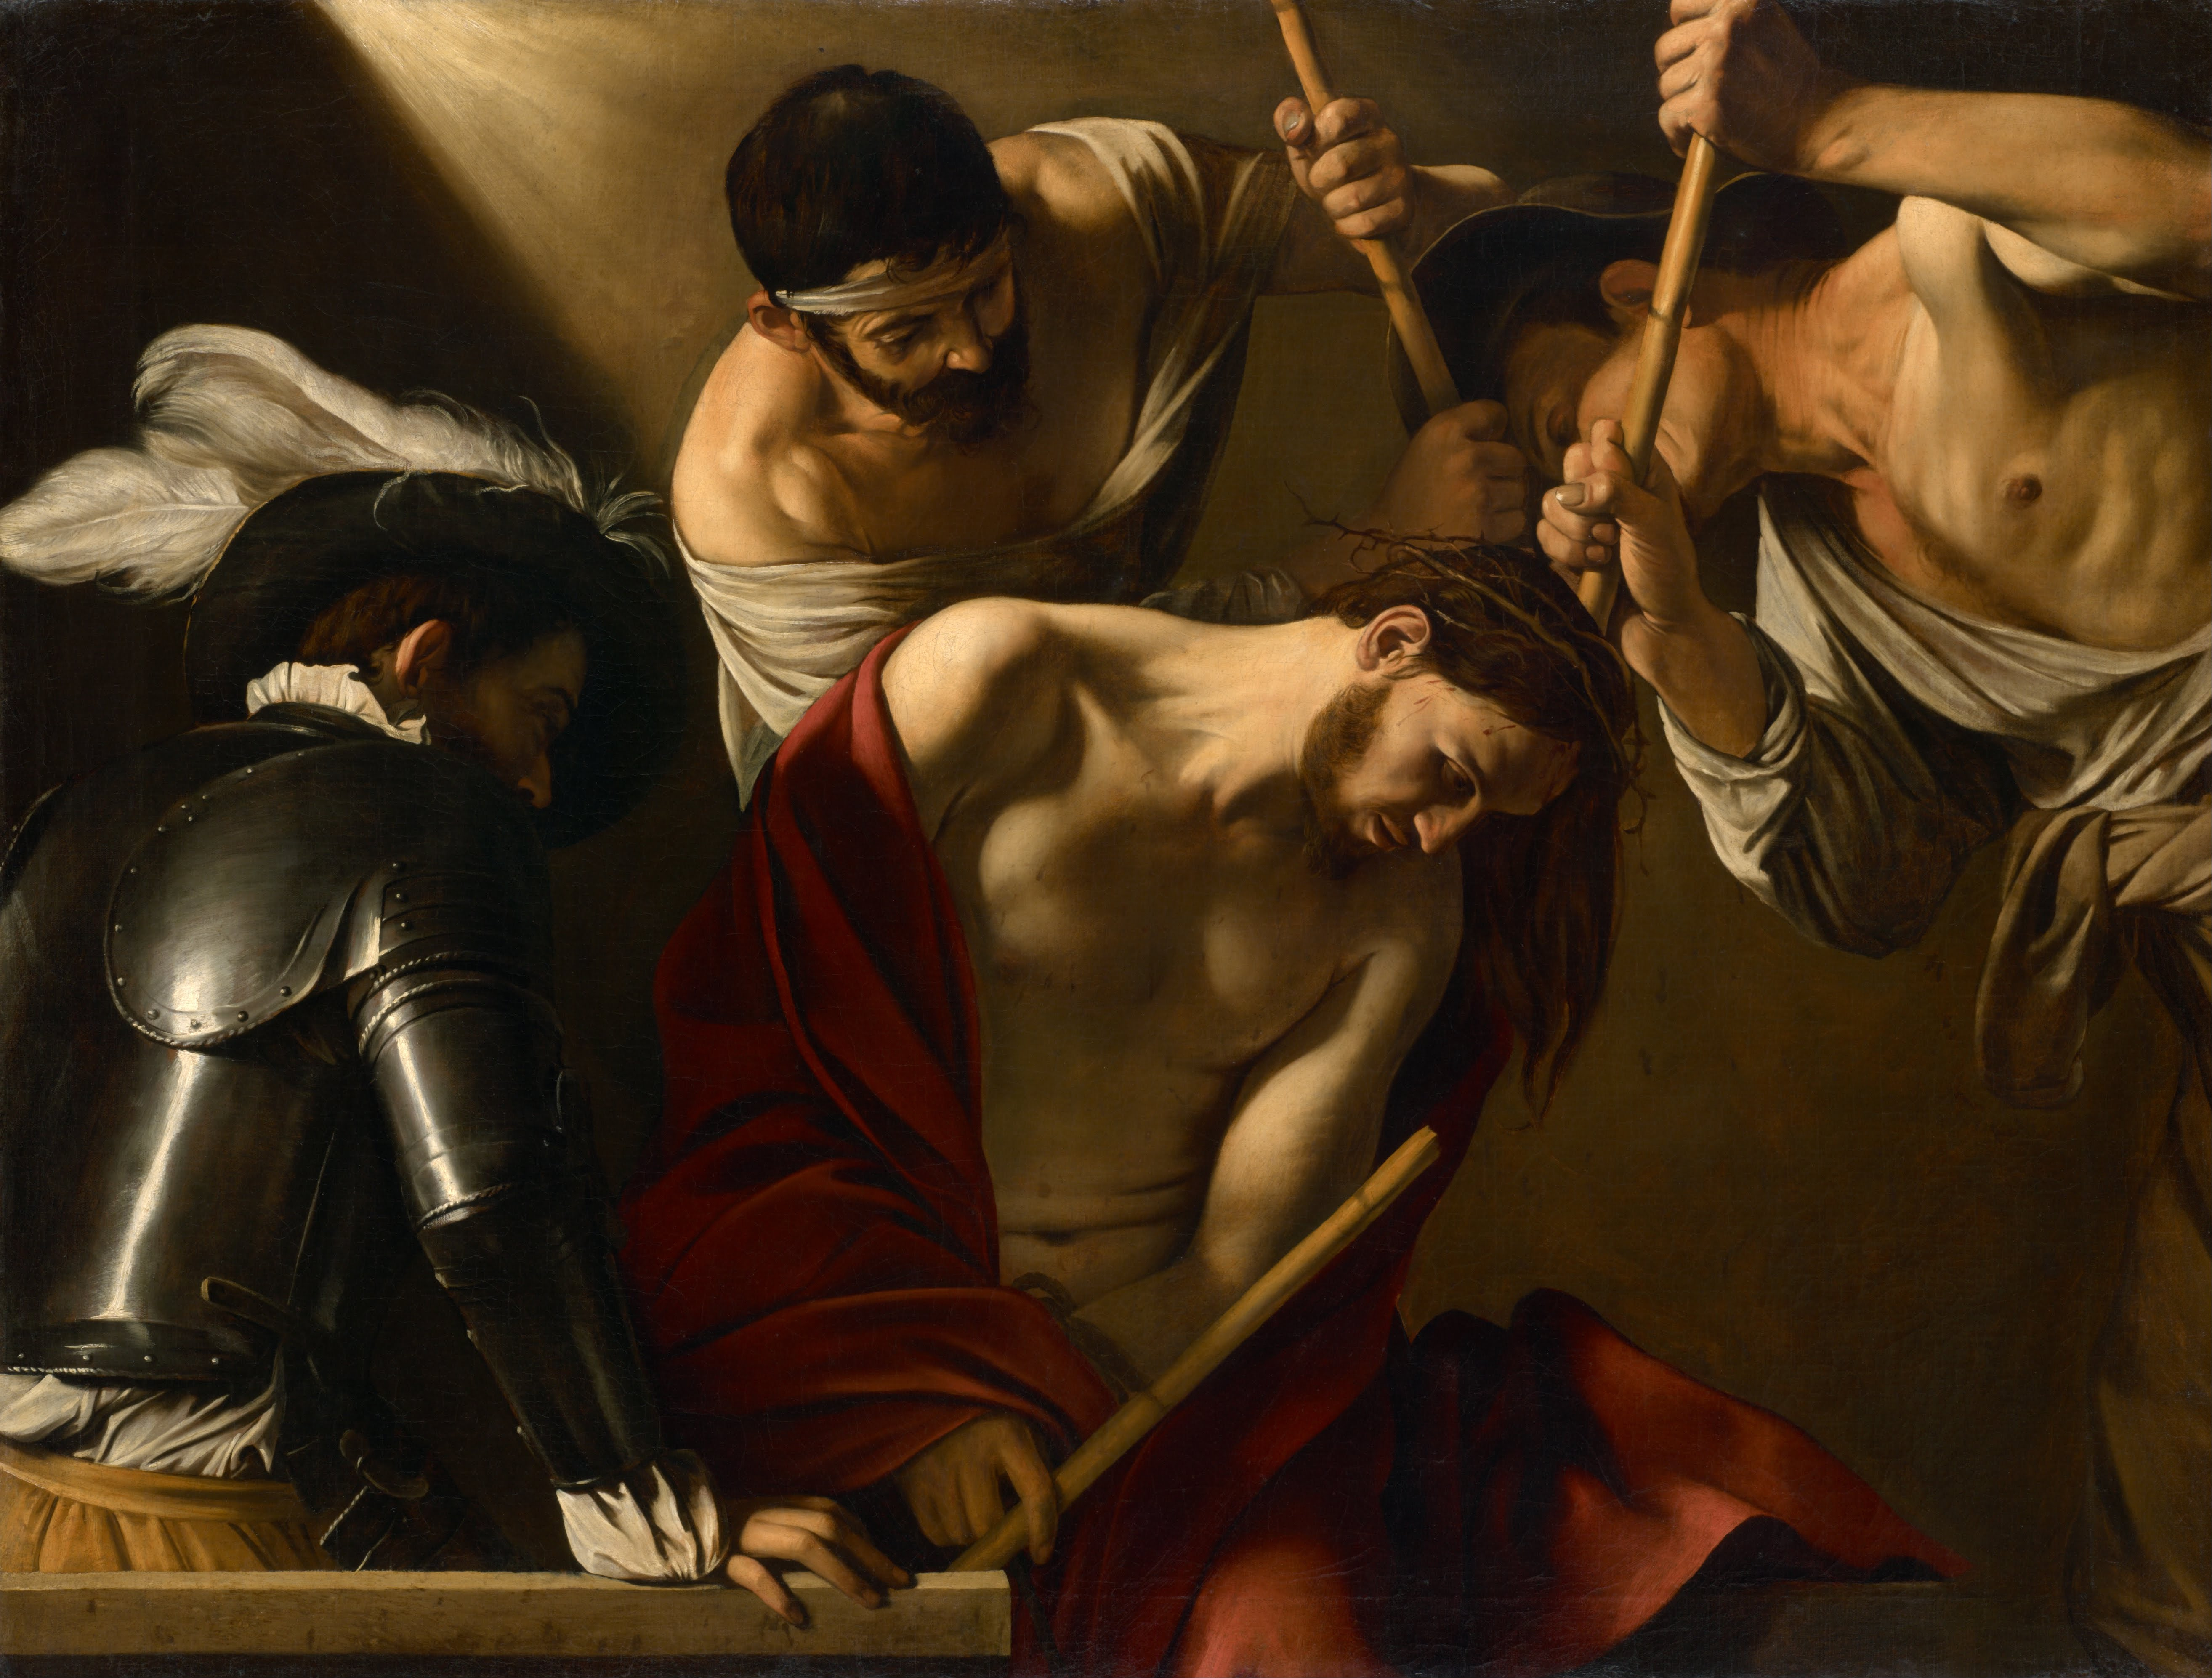 https://upload.wikimedia.org/wikipedia/commons/5/52/Michelangelo_Merisi%2C_called_Caravaggio_-_The_Crowning_with_Thorns_-_Google_Art_Project.jpg